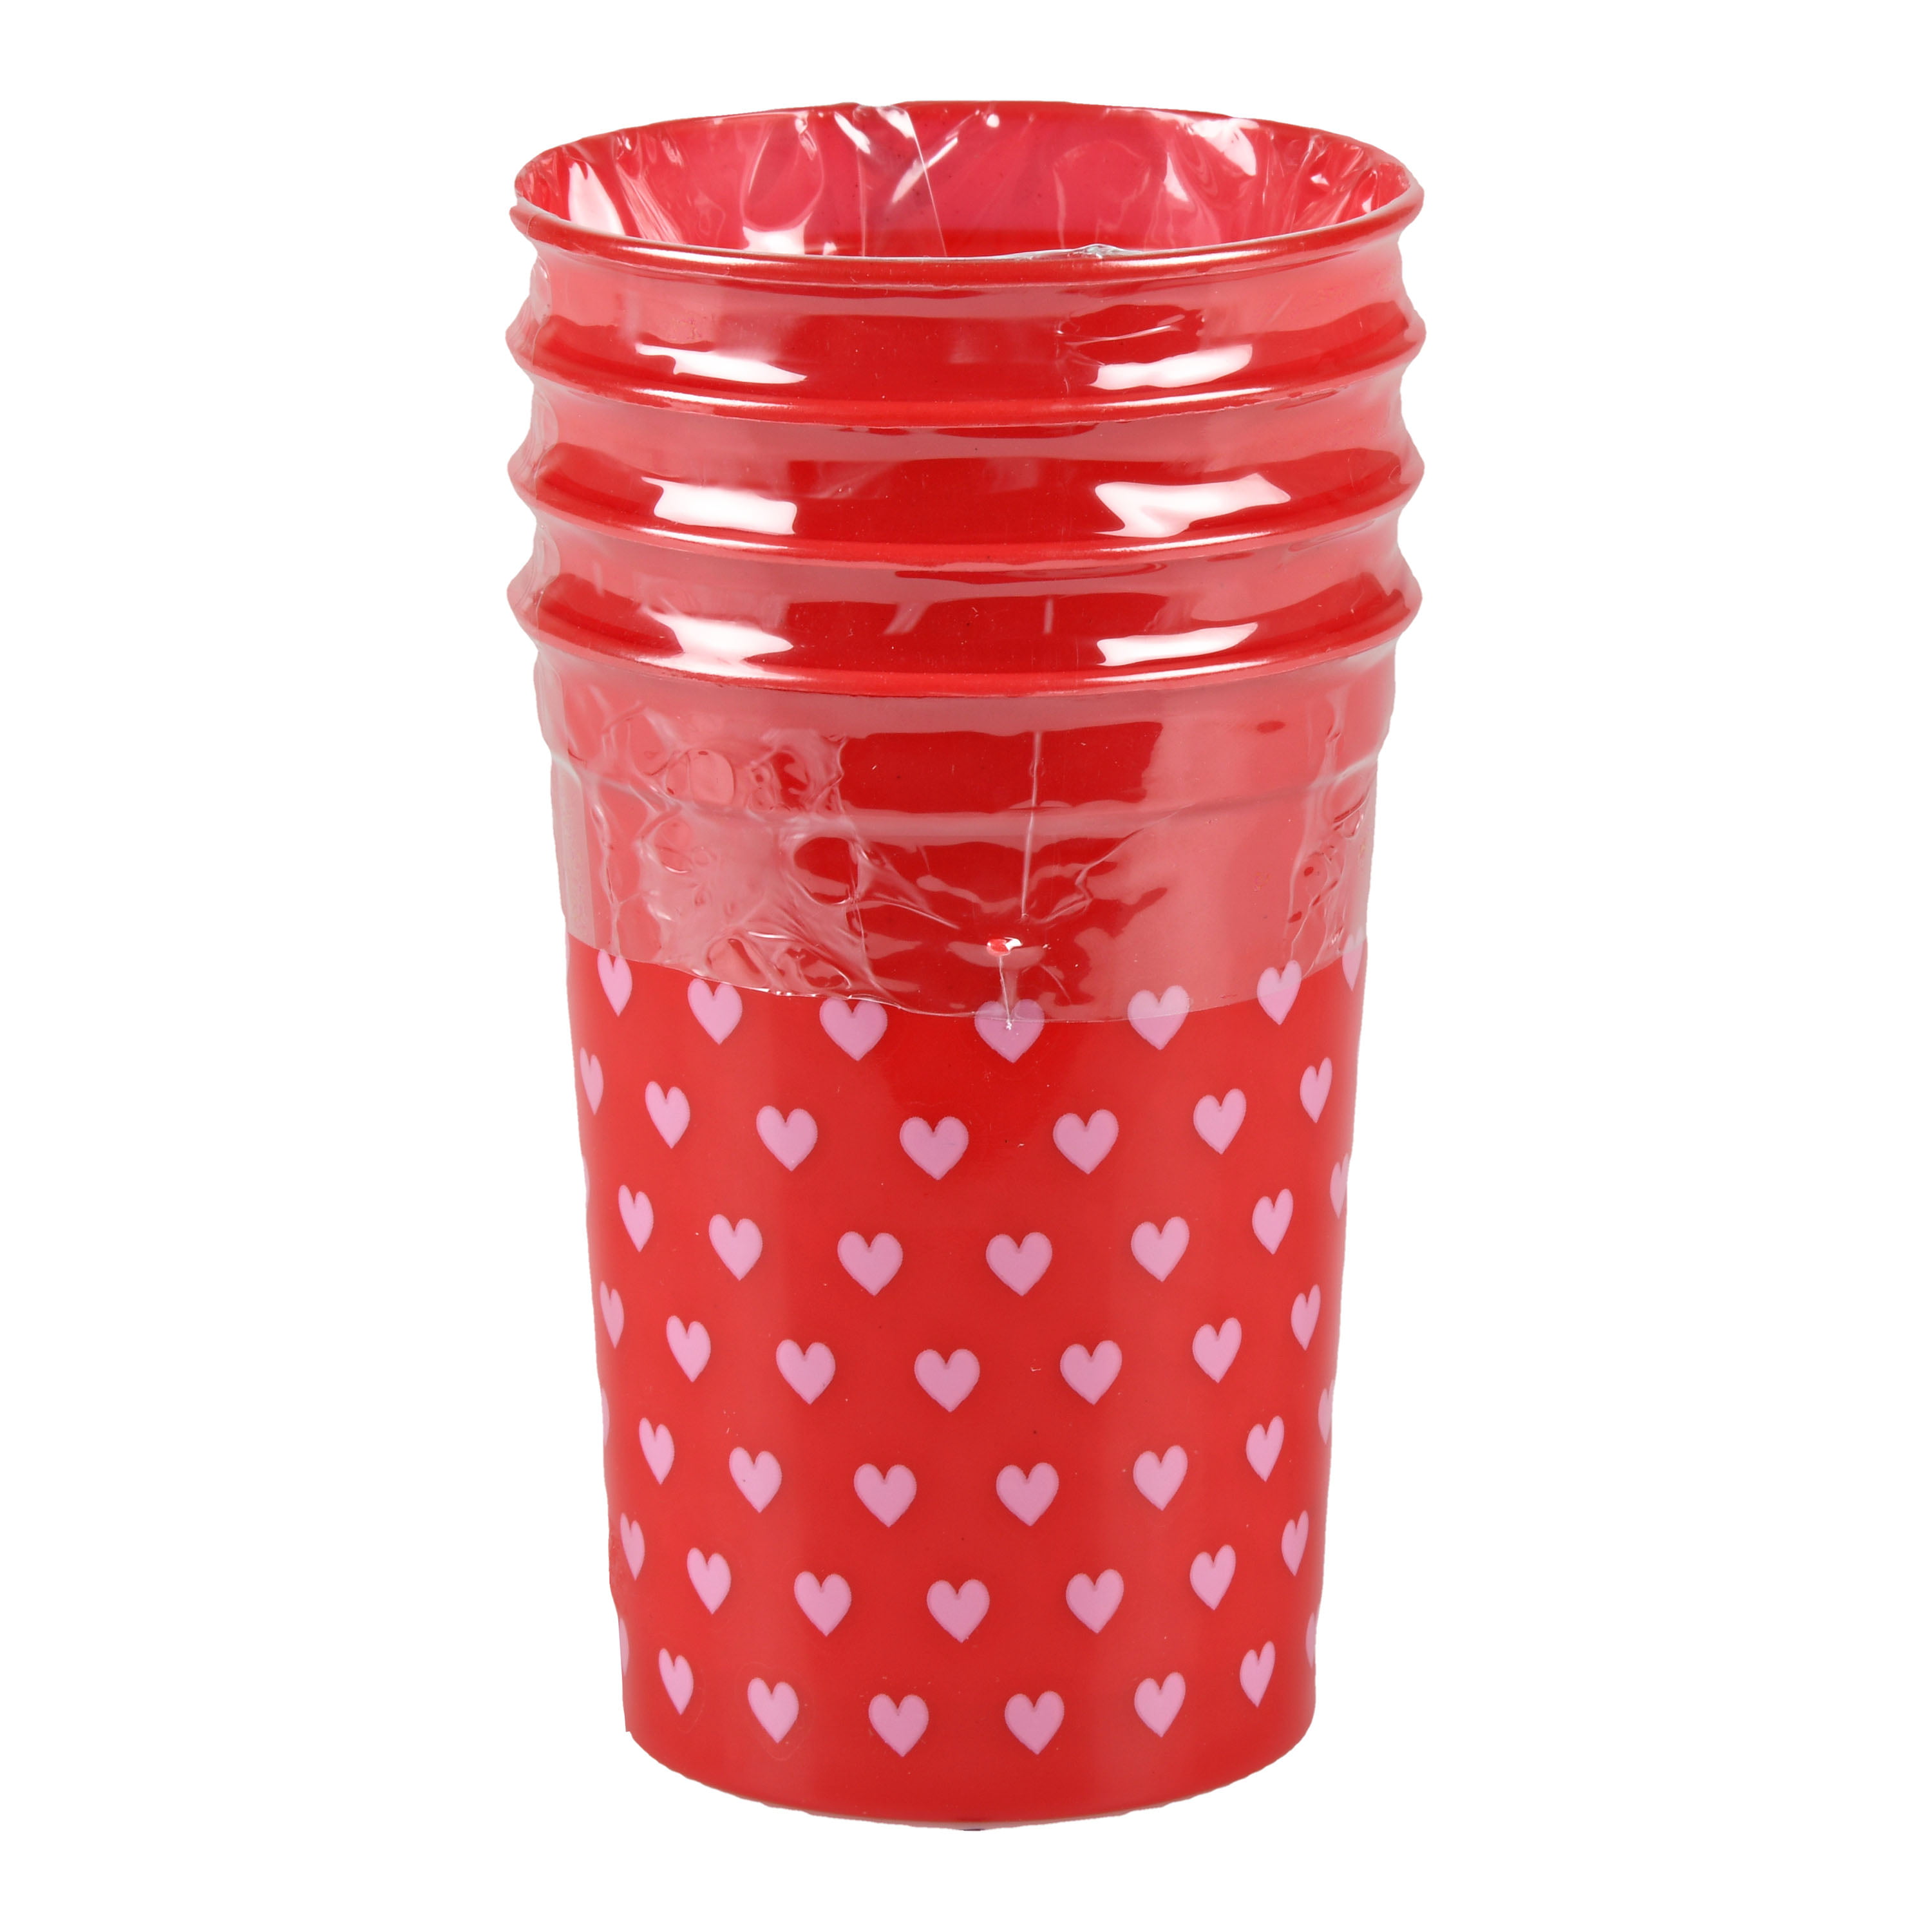 Way To Celebrate Valentine's Day Plastic Cups, Tiny Hearts, 4 Count